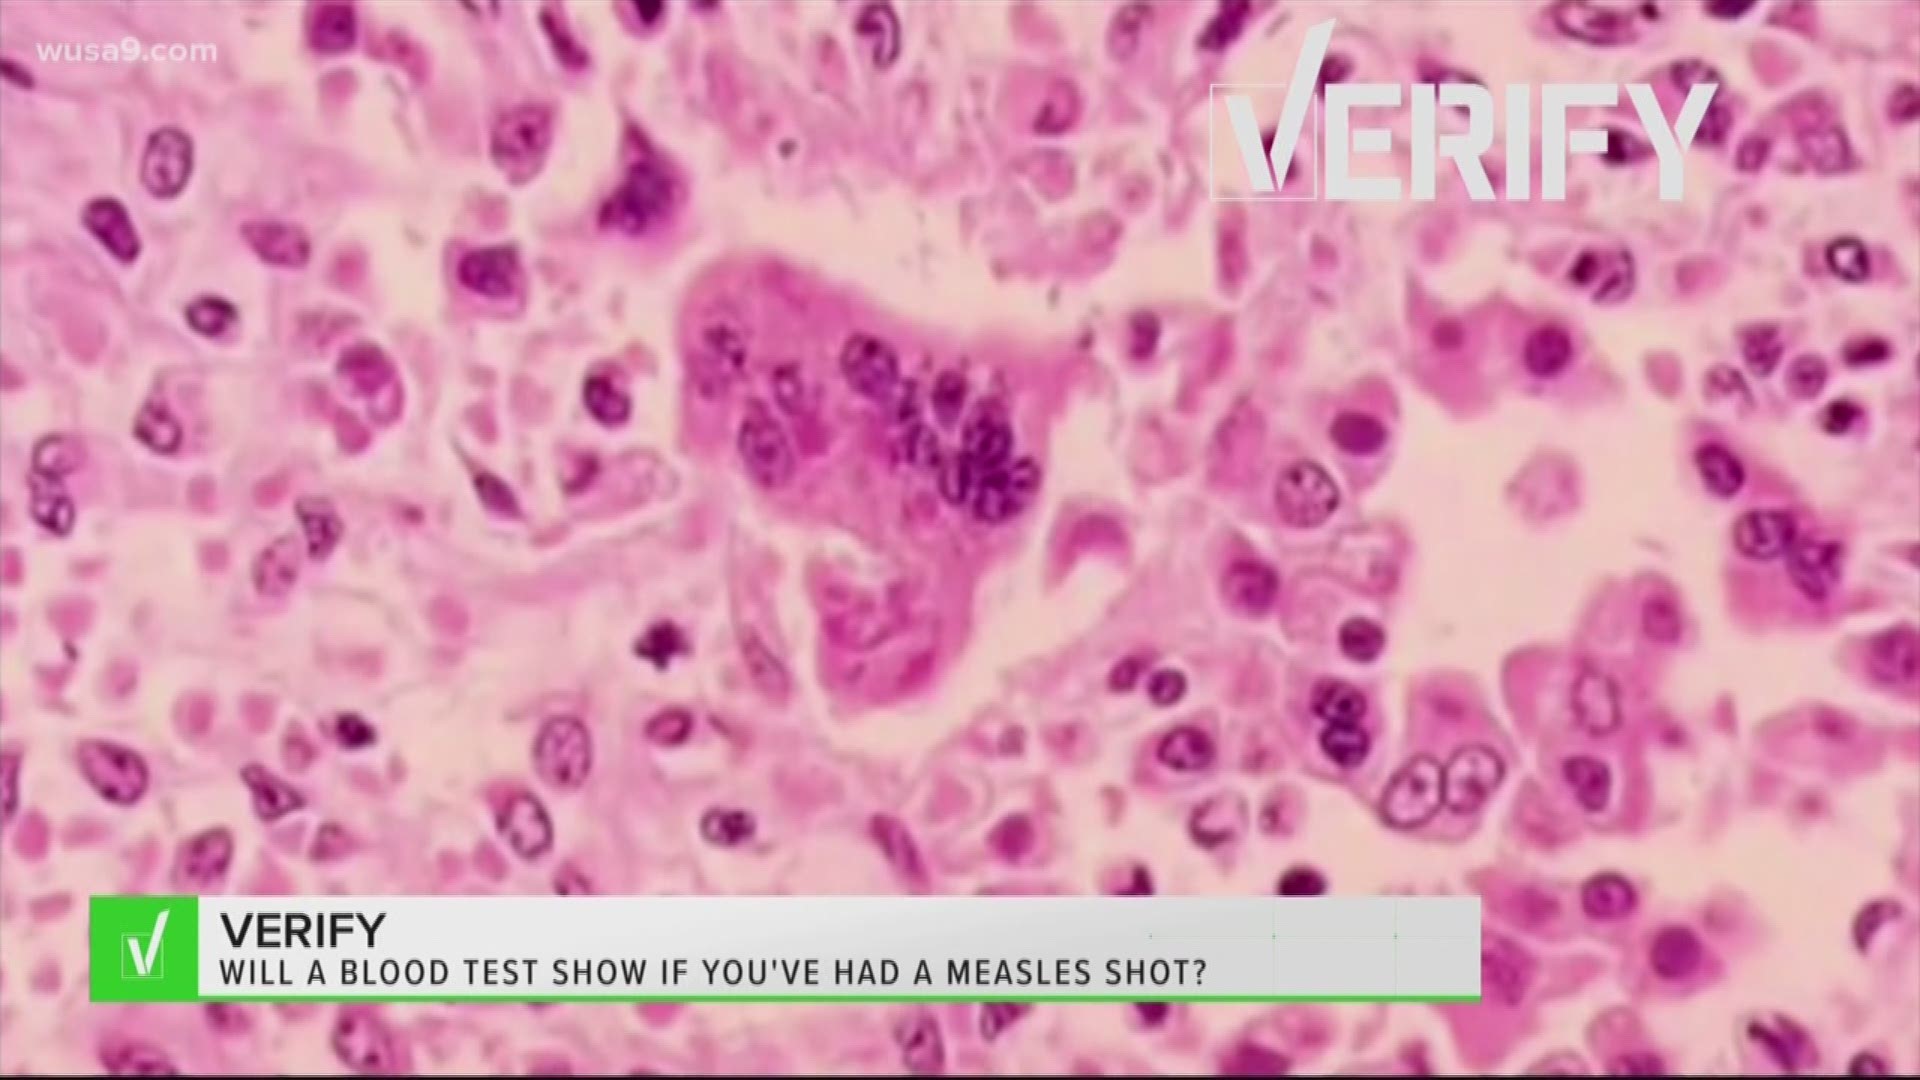 If you don't know your medical records and are worried about the measles, it turns out you can run a test to see if you ever got the shot.